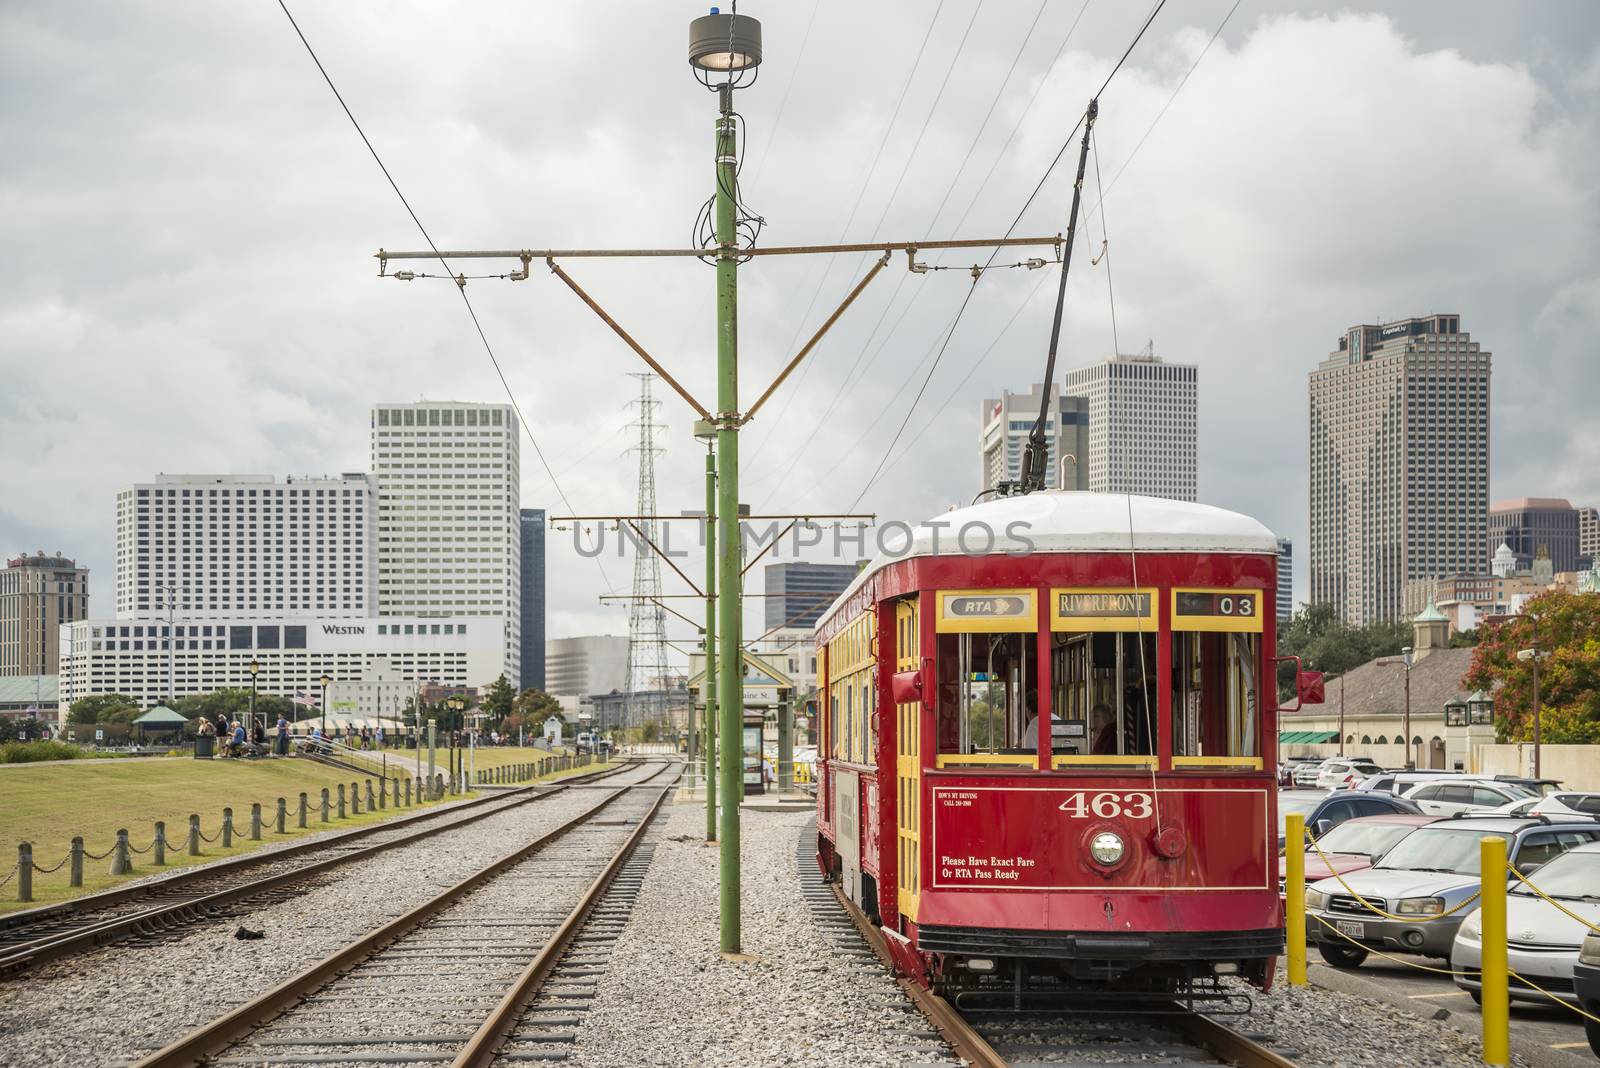 NEW ORLEANS, USA - OCTOBER 18: New Orleans Streetcar Line, on October 18, 2016. Newly revamped after Hurricane Katrina in 2005, the New Orleans Streetcar line began electric operation in 1893.